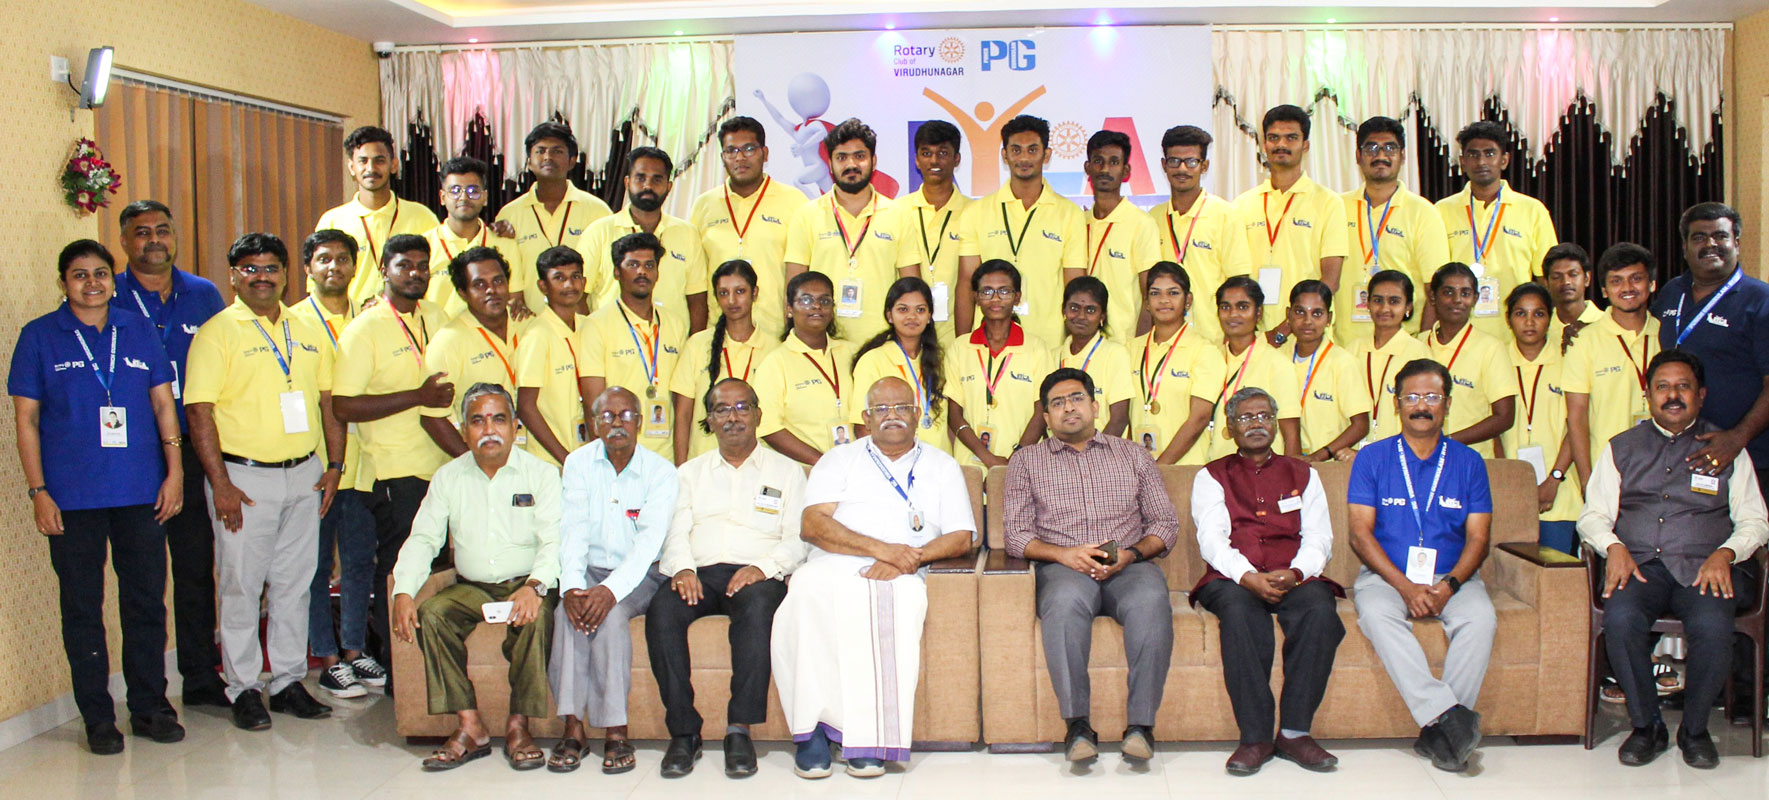 DG Muthu and Tirunelveli District Collector Vishnu Venugopalan (seated, fifth from L) with participants and faculty at one of the RYLA valedictory events. Umashankar Jayaraman, secretary, Punch Gurukulam, and Rtn Thanga Vijaya are seen on the extreme left.